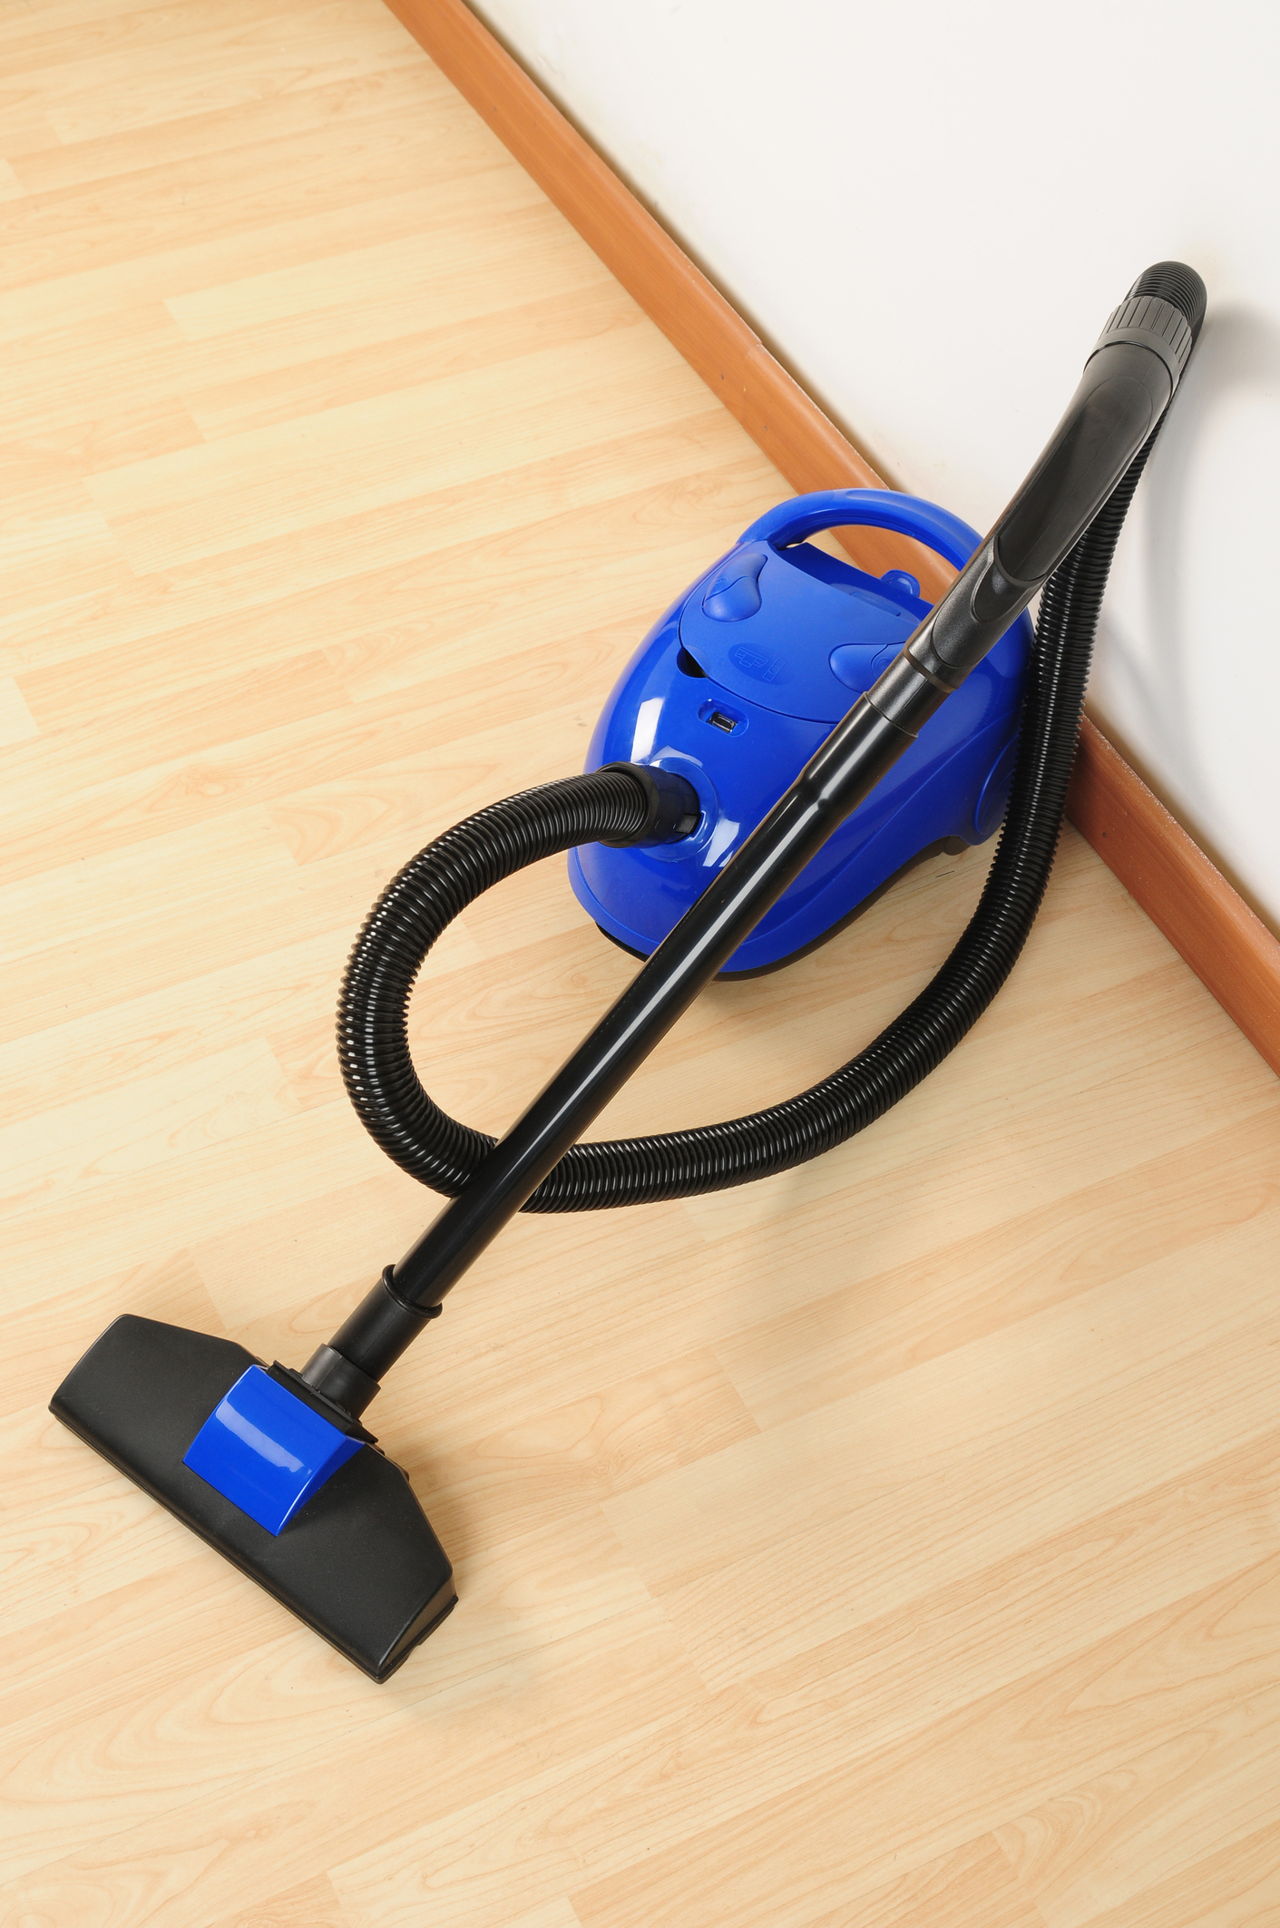 Clean Laminate Floors Without Streaking, How To Clean Laminate Wood Floors Without Streaking